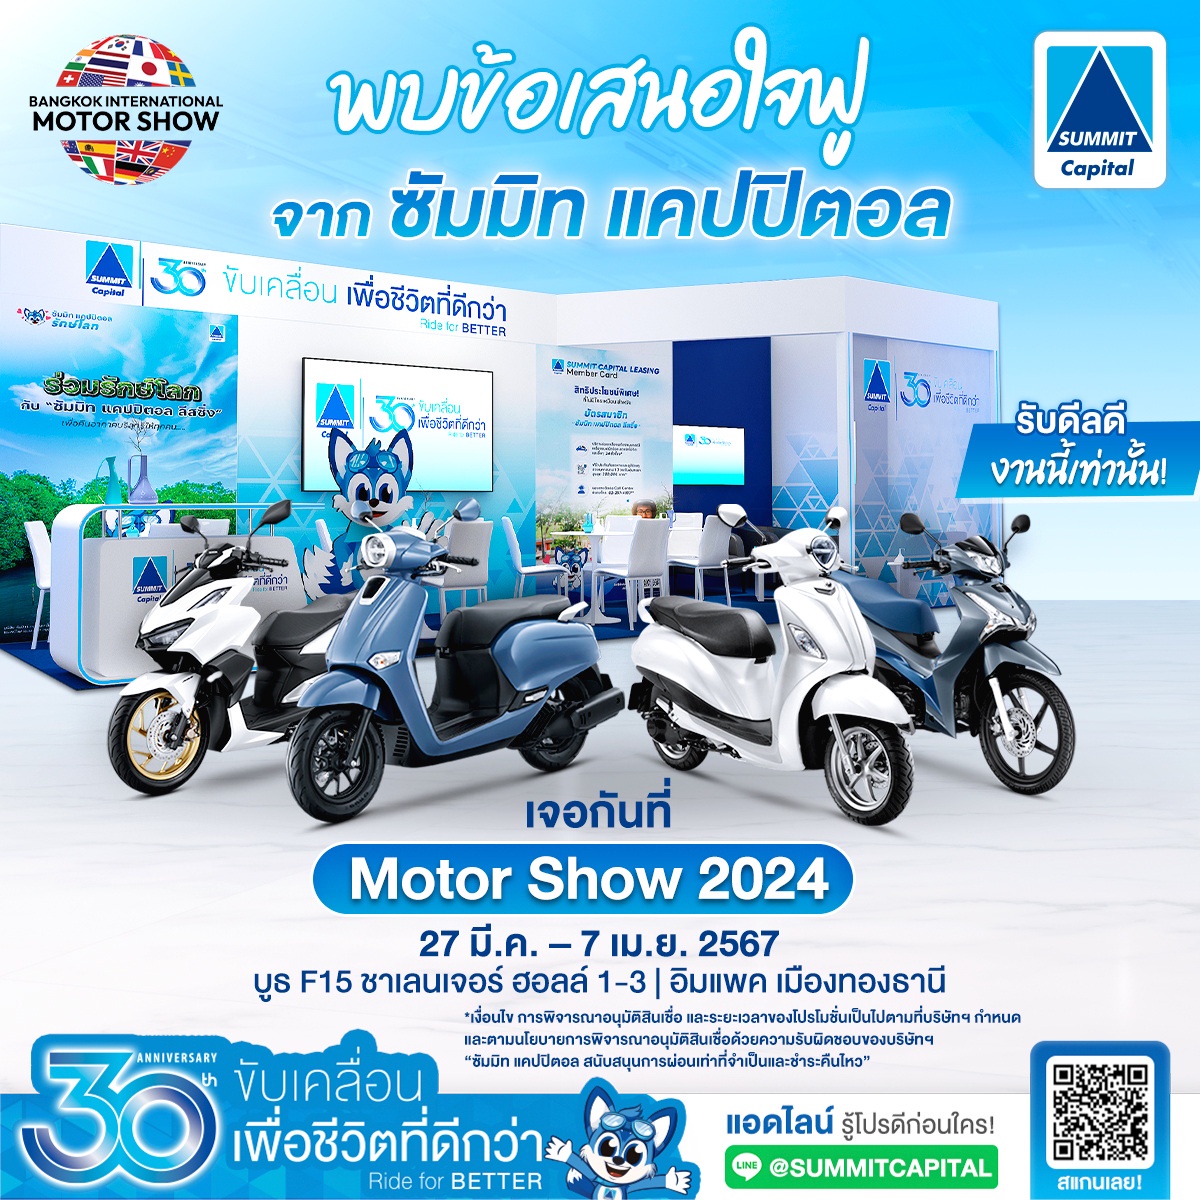 Summit Capital Leasing, commemorating its 30th anniversary with the motto Ride for BETTER, invites you to visit our booth at the Motor Show 2024